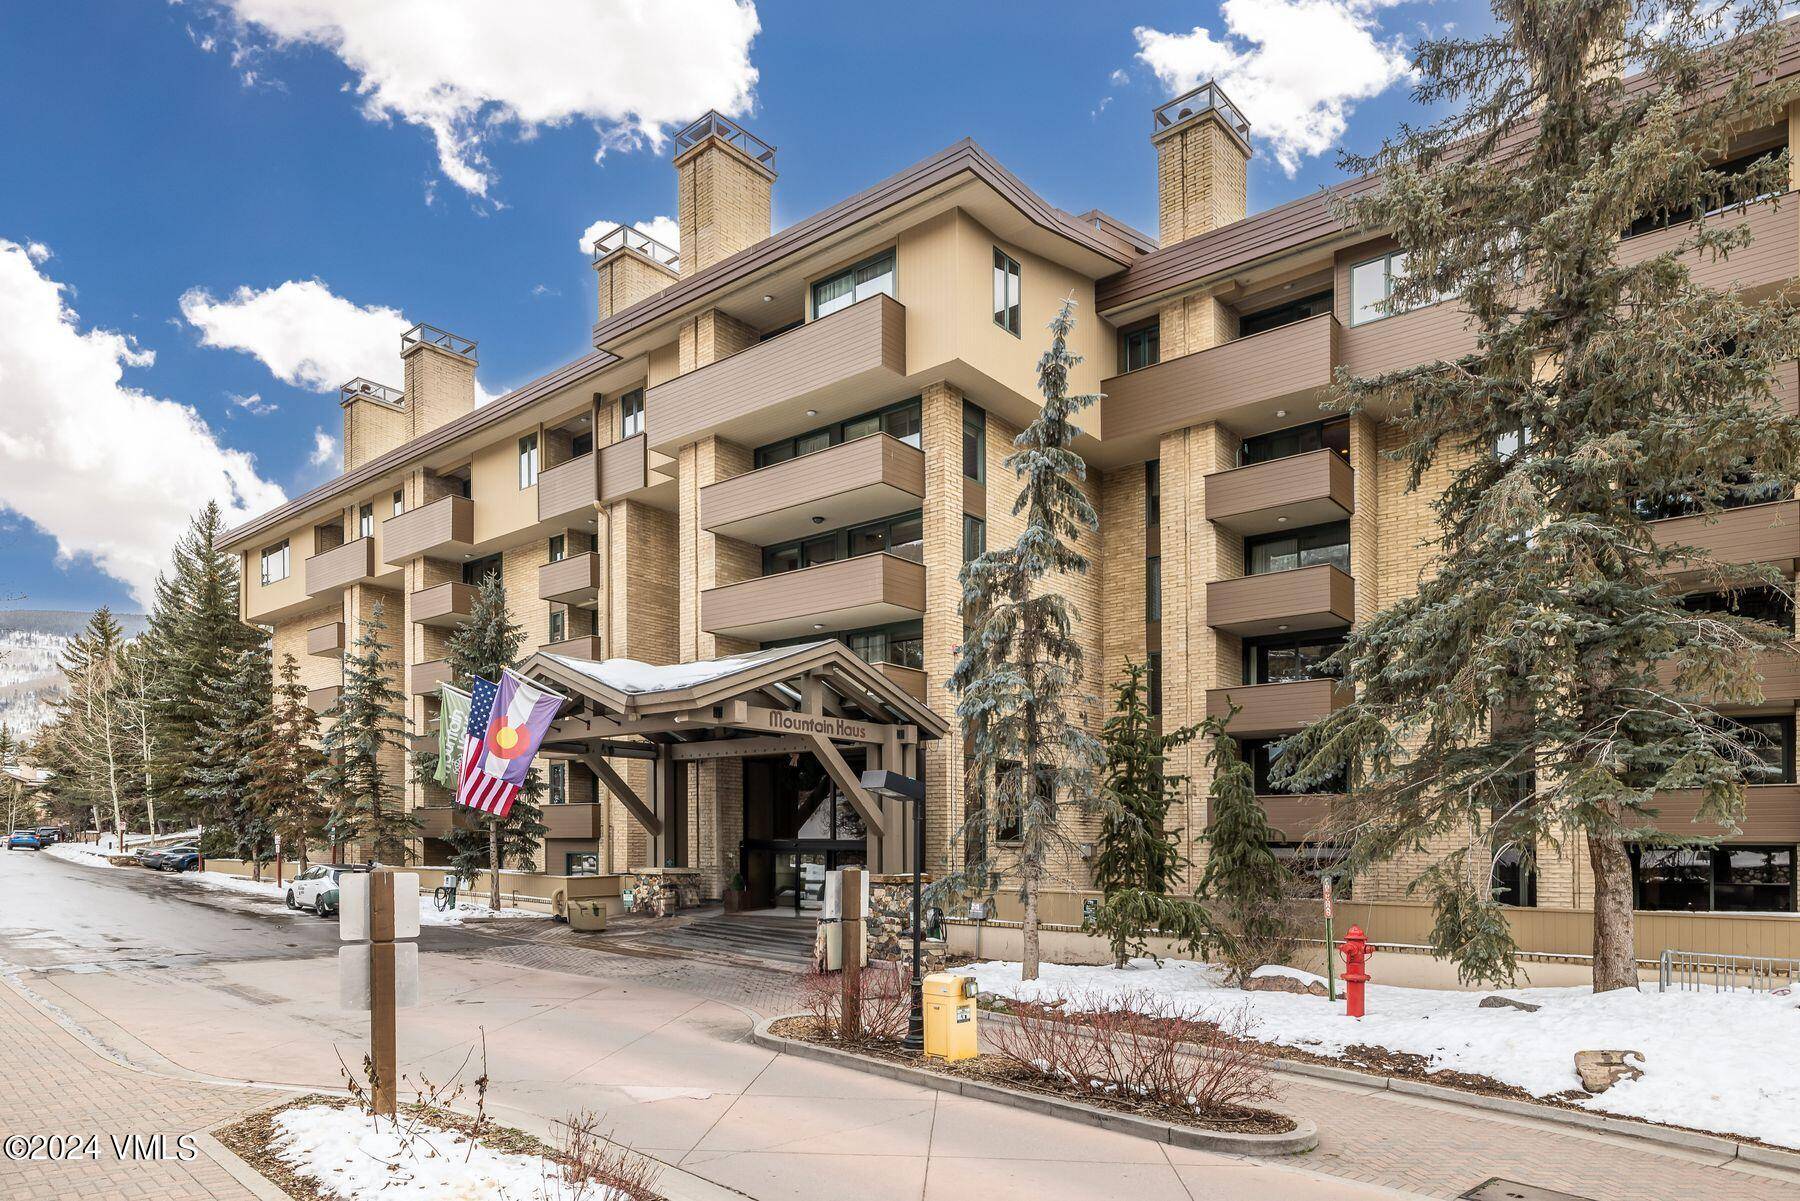 Nestled along Gore Creek in the heart of Vail Village, this 3 bedroom, 2 story platinum rated residence is a short walk to Gondola One.